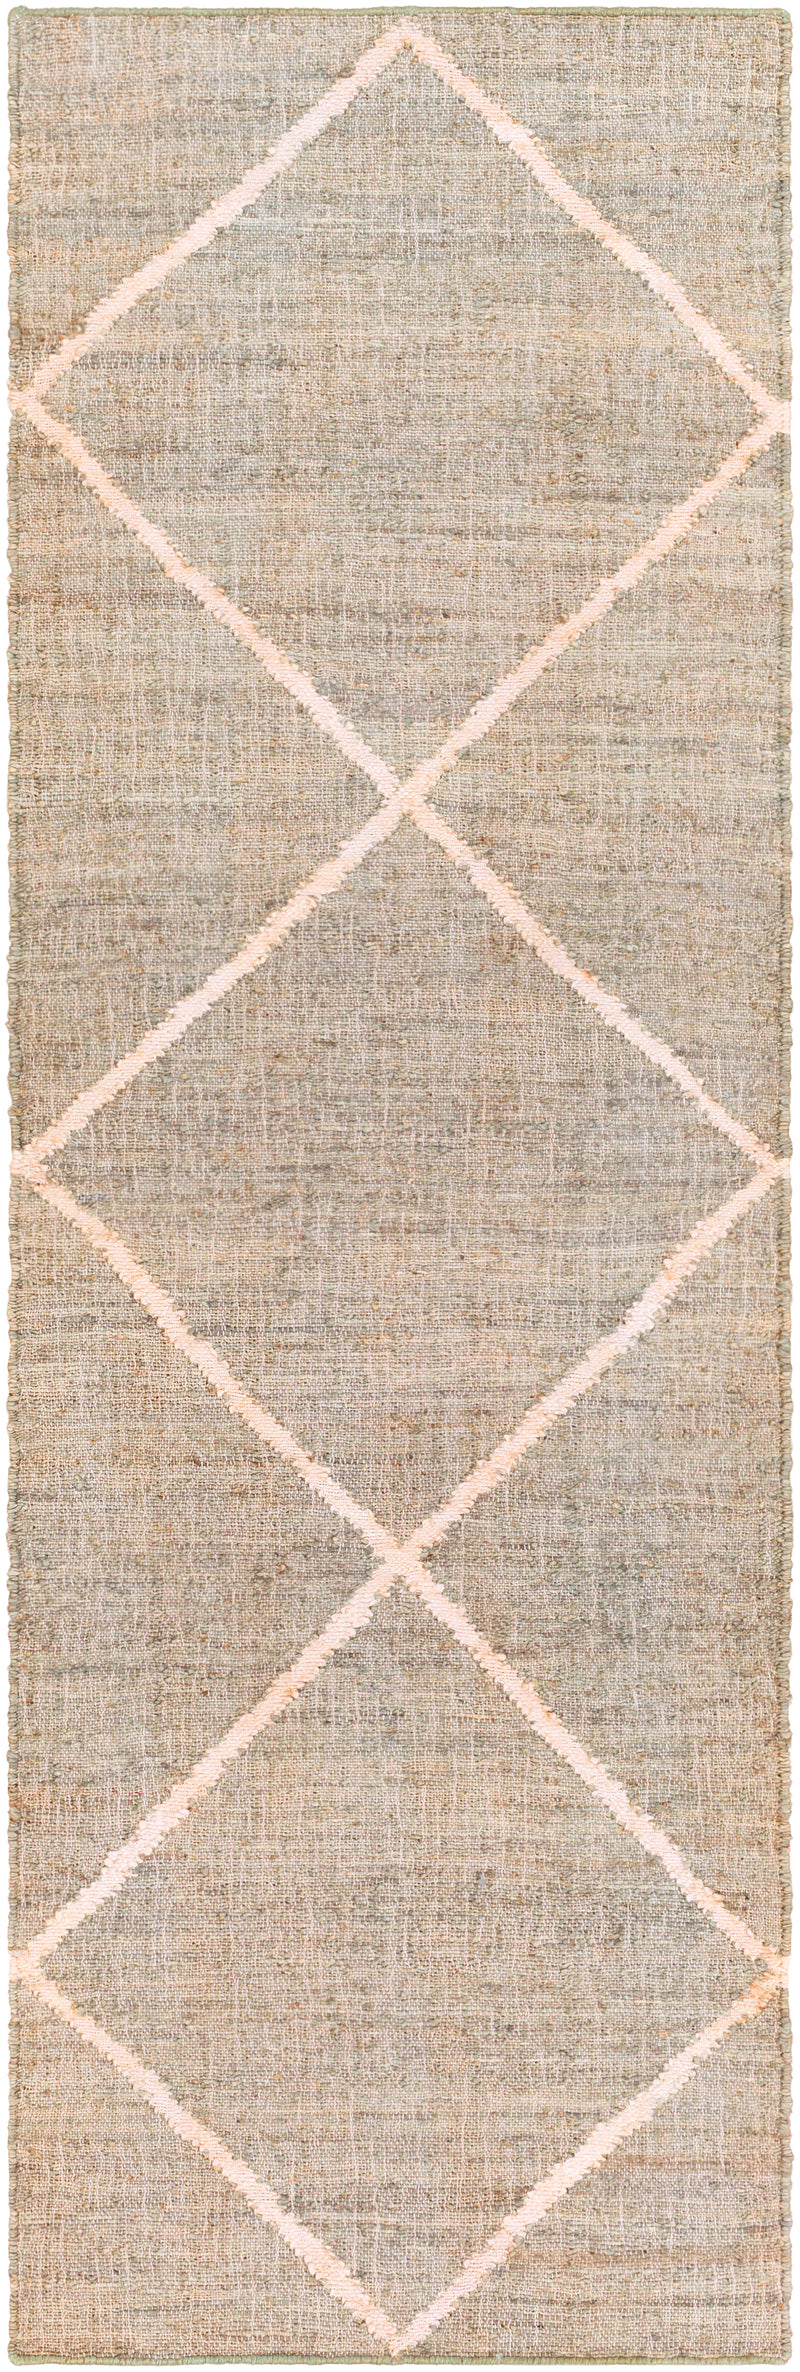 The Bermuda Rug is available in both runner and area rug sizes. 